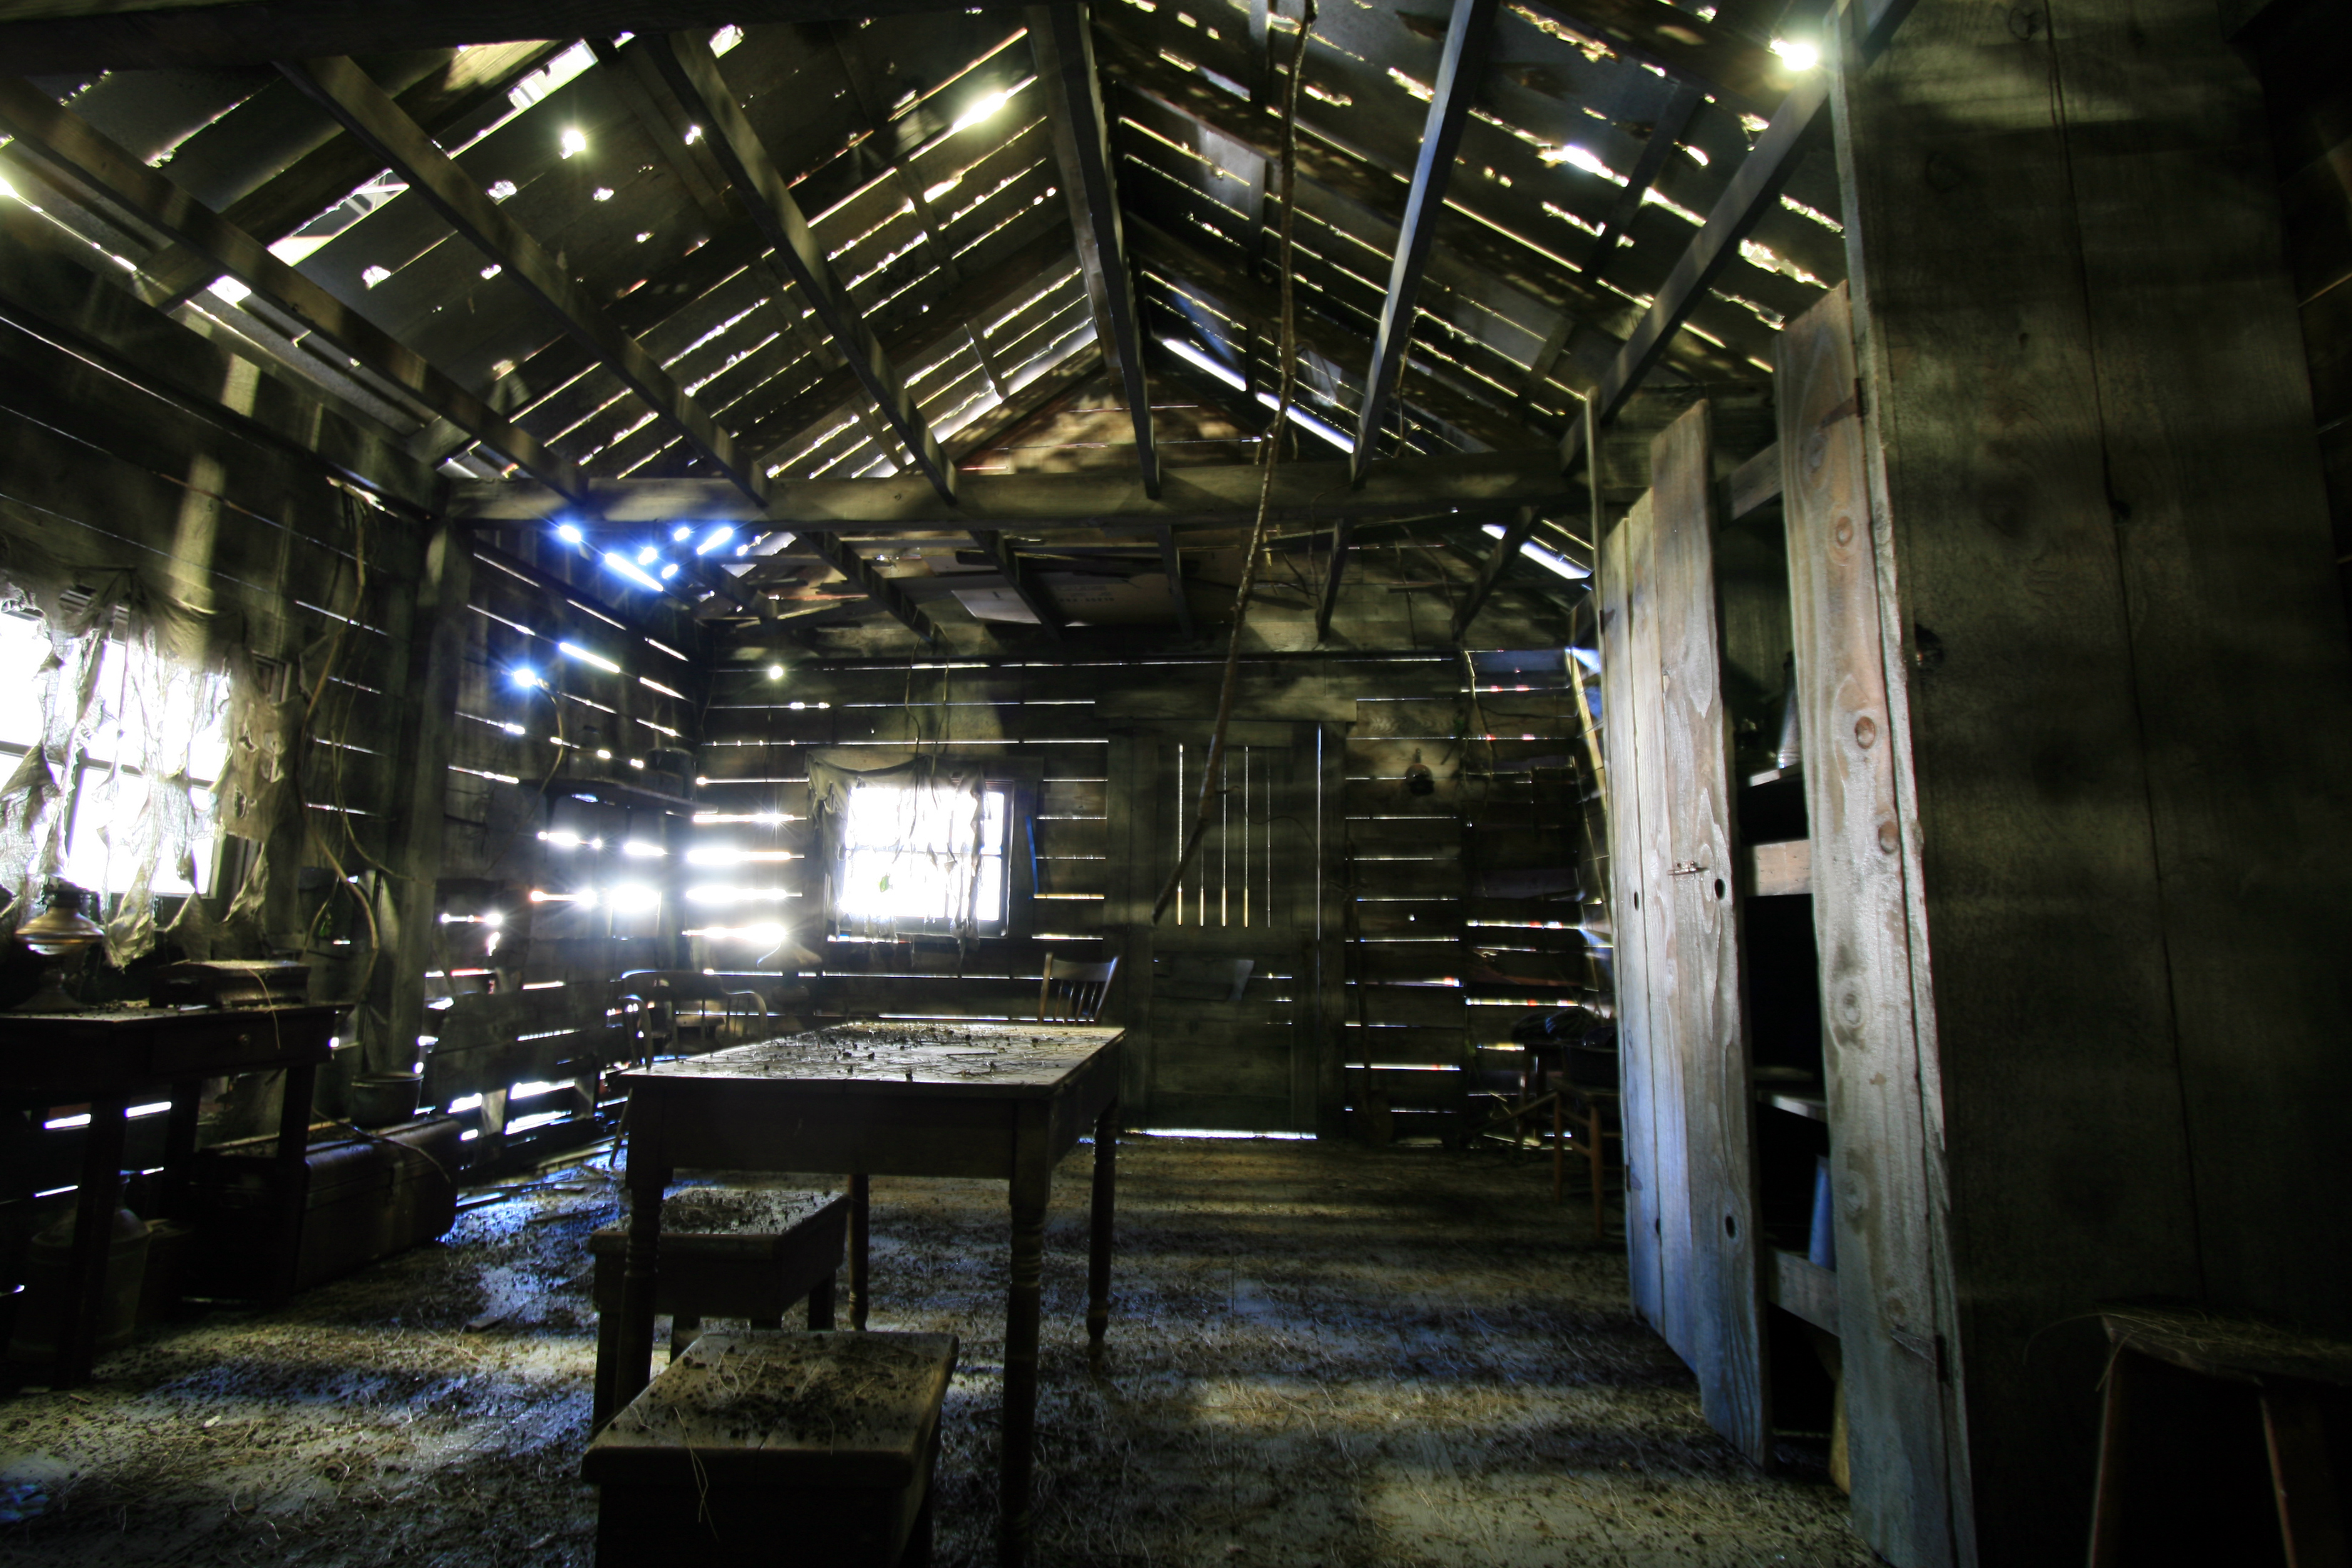 Jacob's cabin, built on stage for 